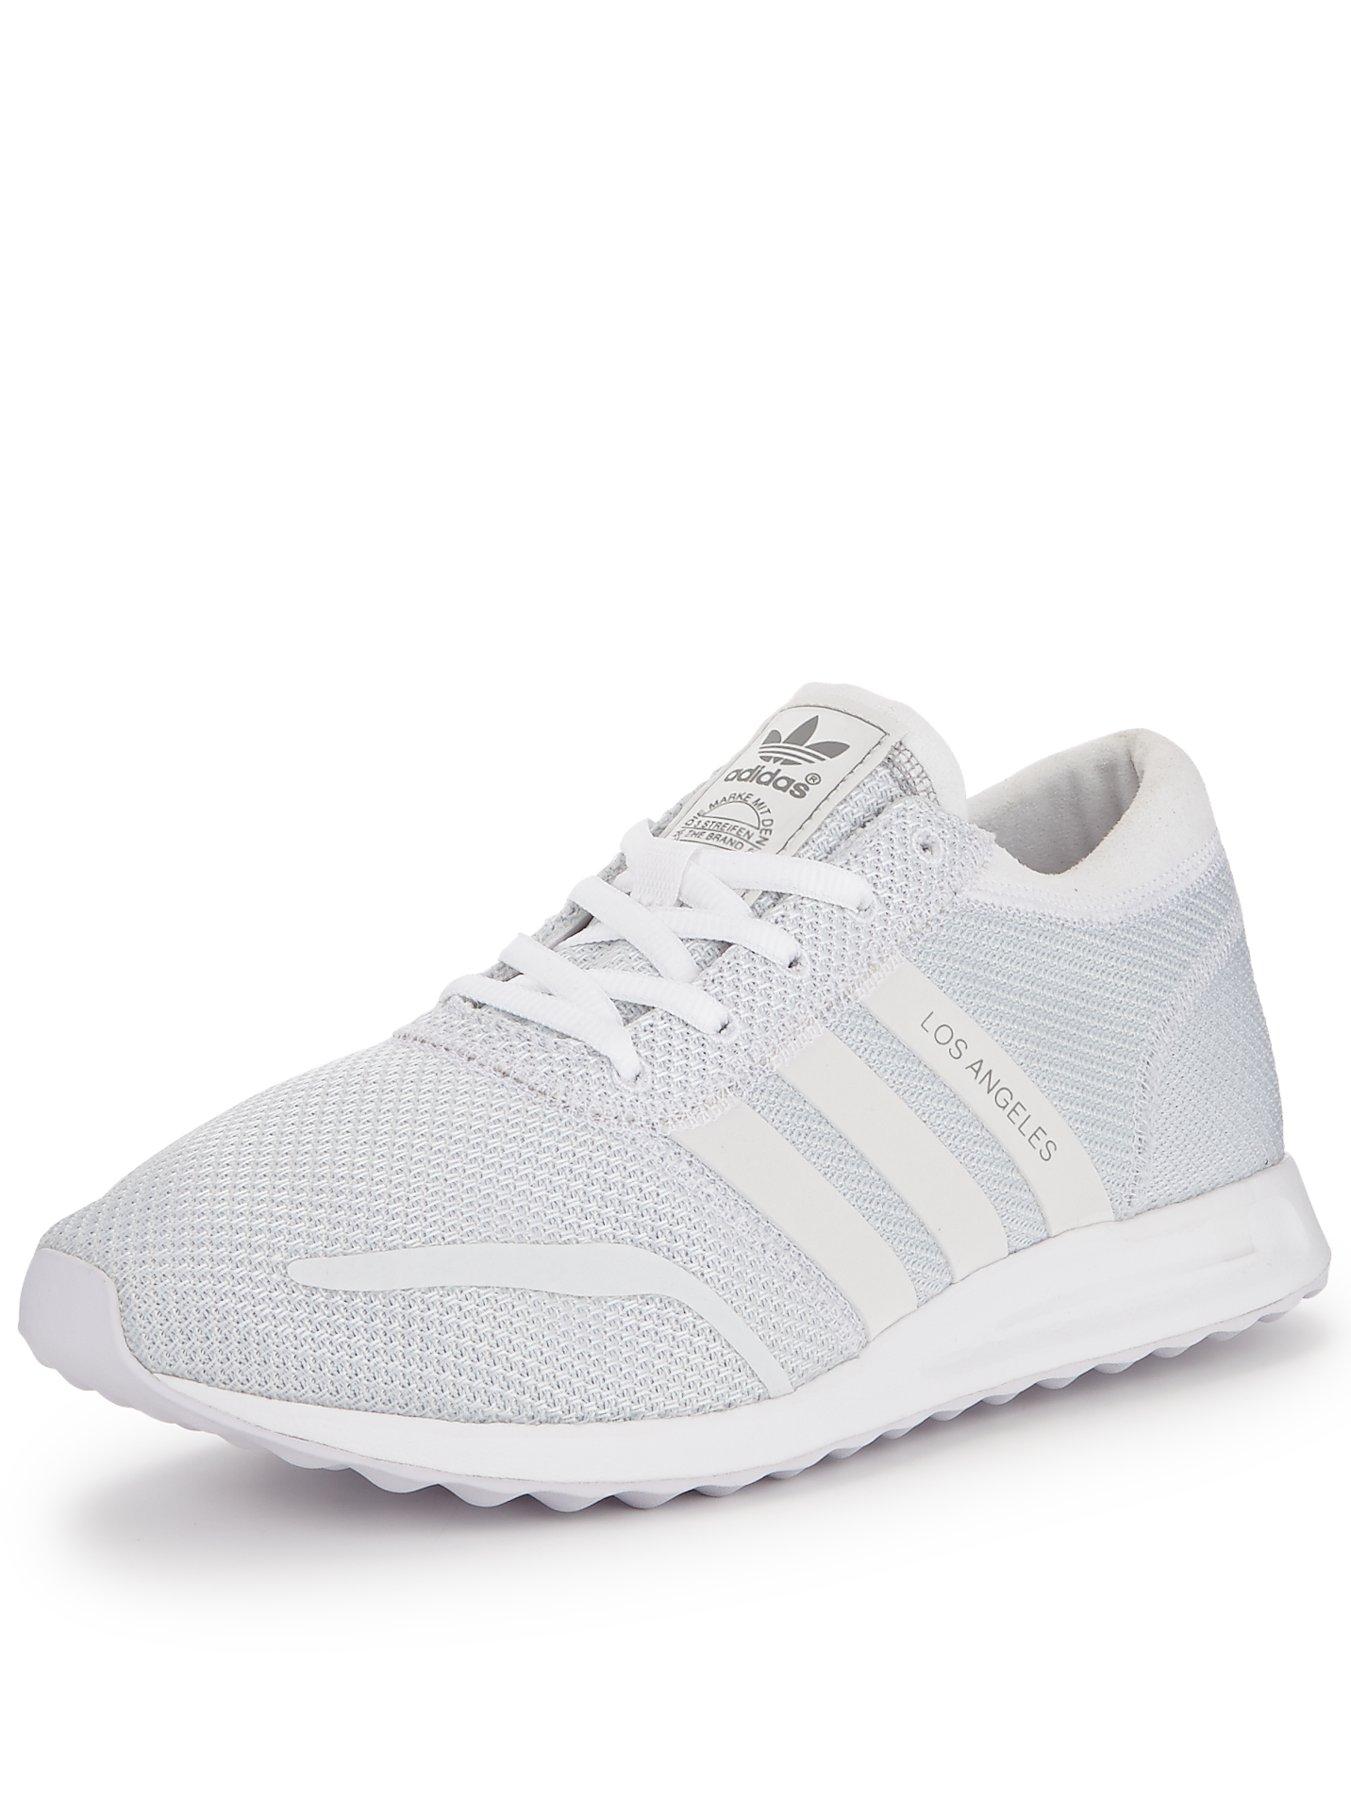 white adidas trainers sale